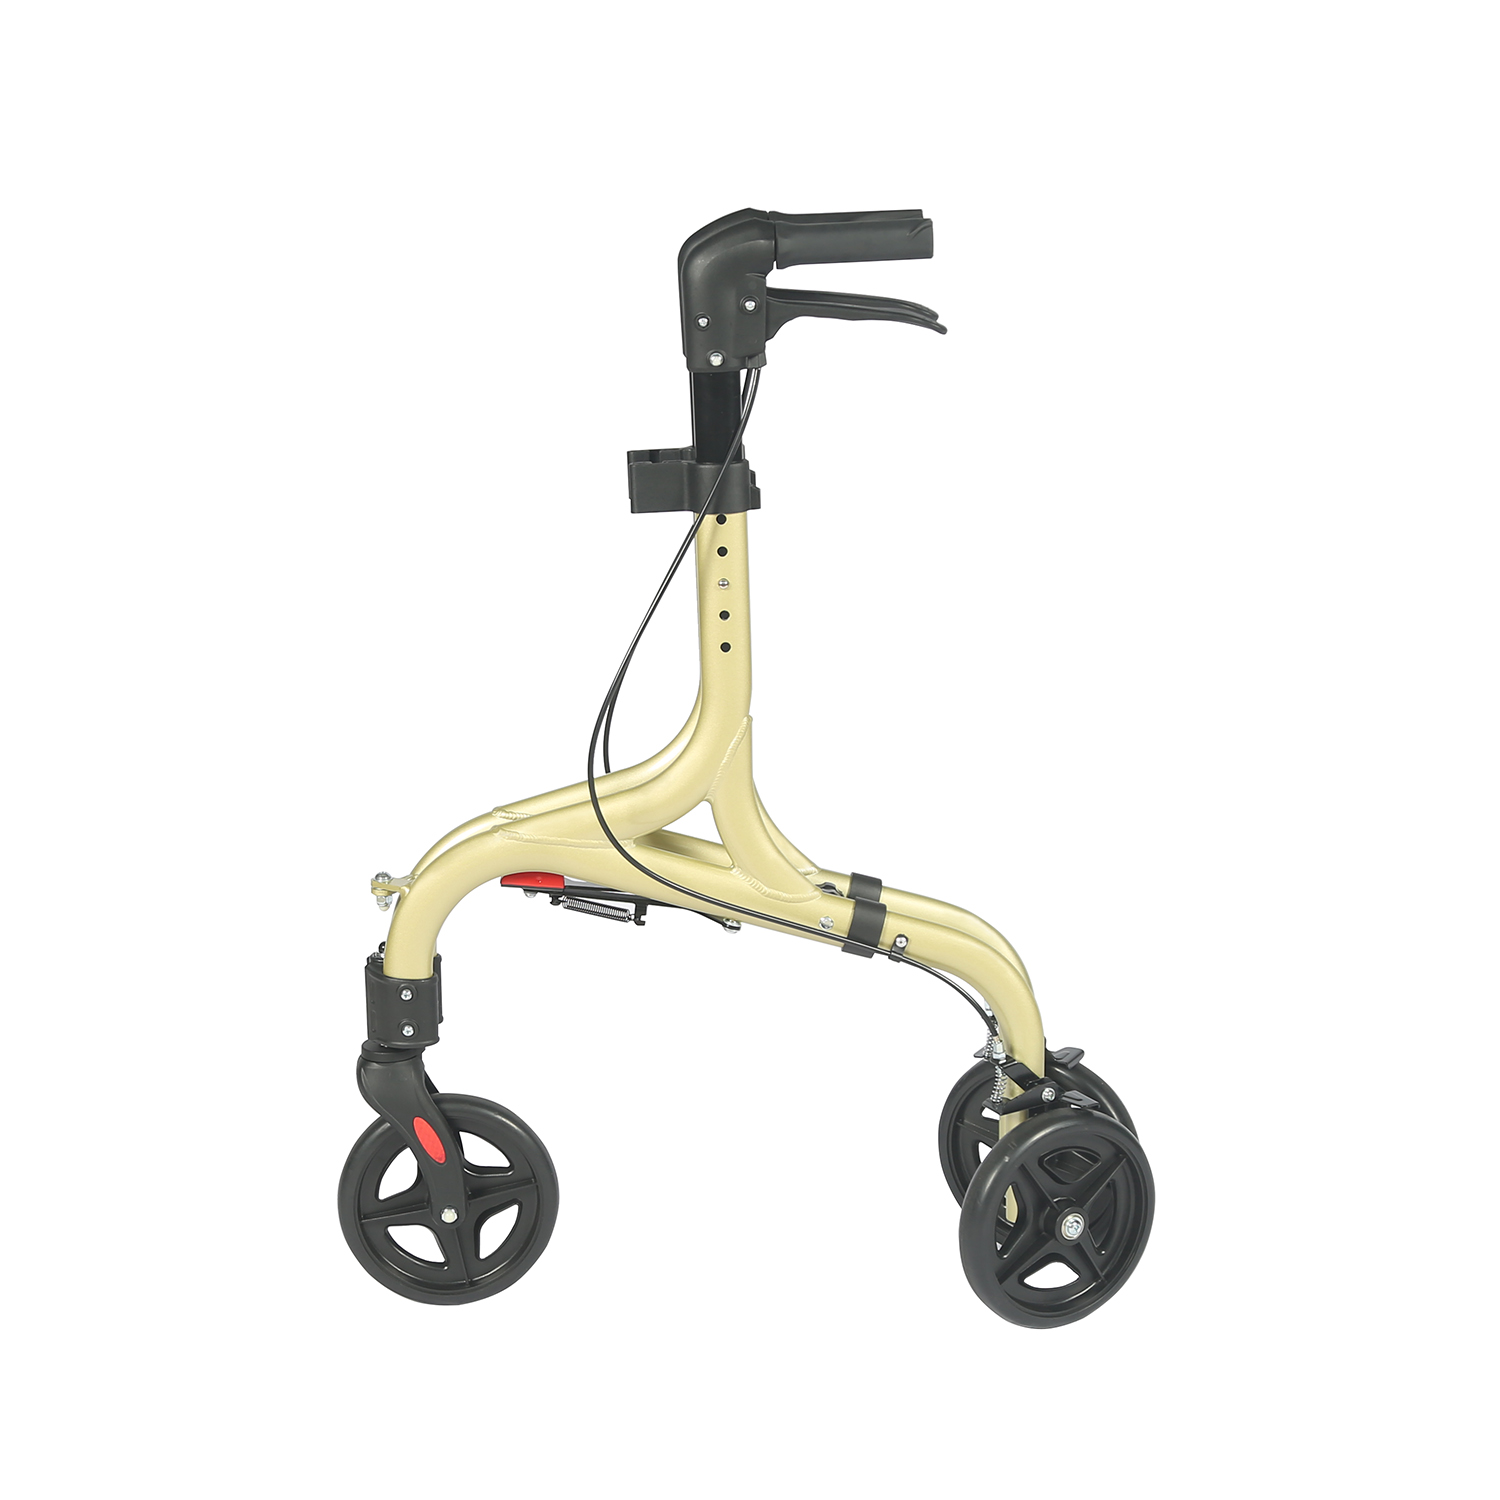 New Tonia Aluminum Rollator Walker With 3 Wheels Ultra Compact Size For Storage Trb01champagne3